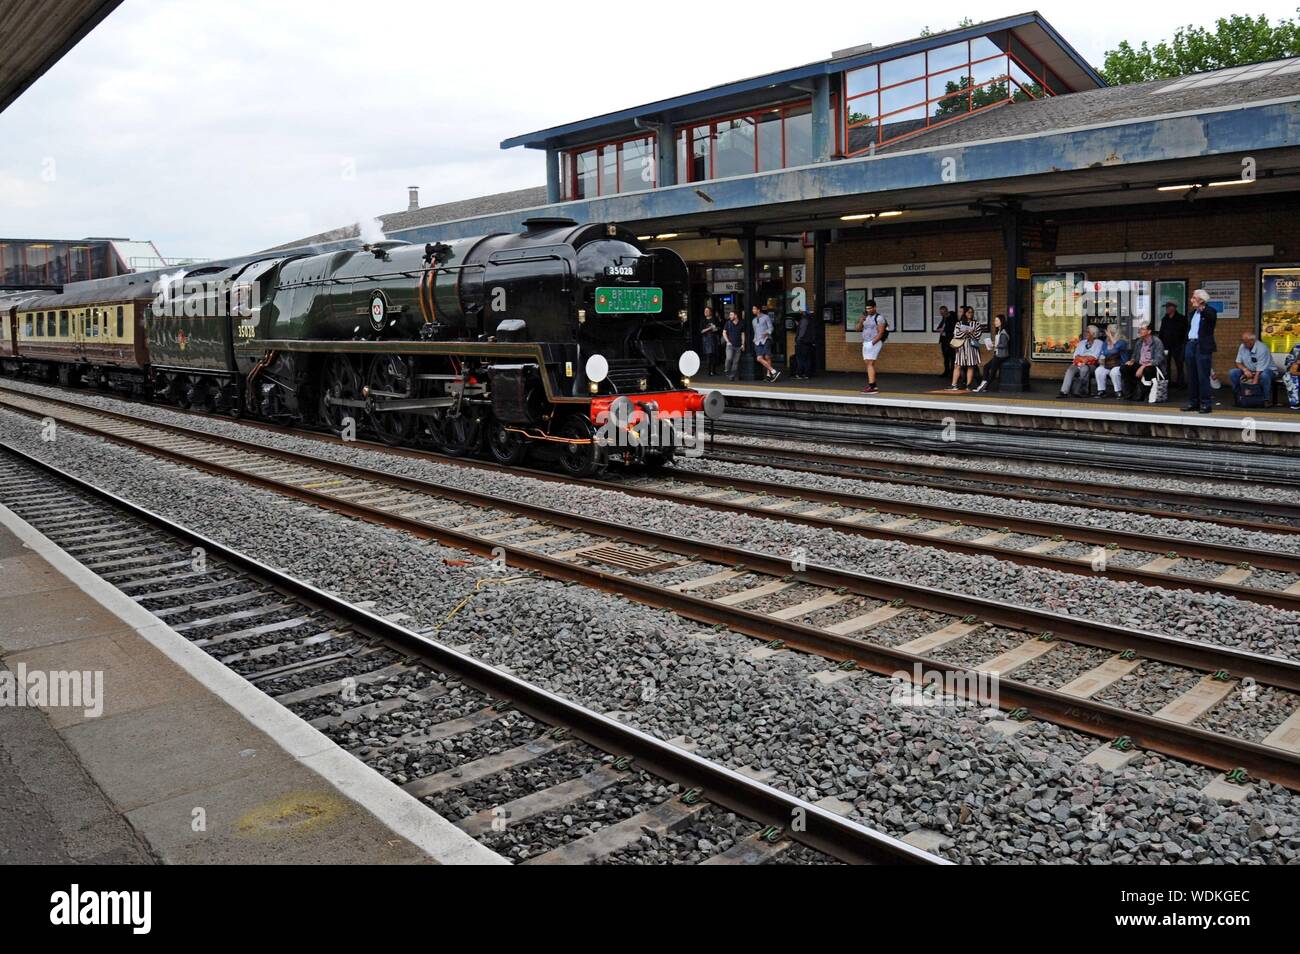 Ex Southern Railway Merchant Navy Class steam locomotive 35028 'Clan Line' with a British Pullman excursion train at Oxford Railway Station. Stock Photo